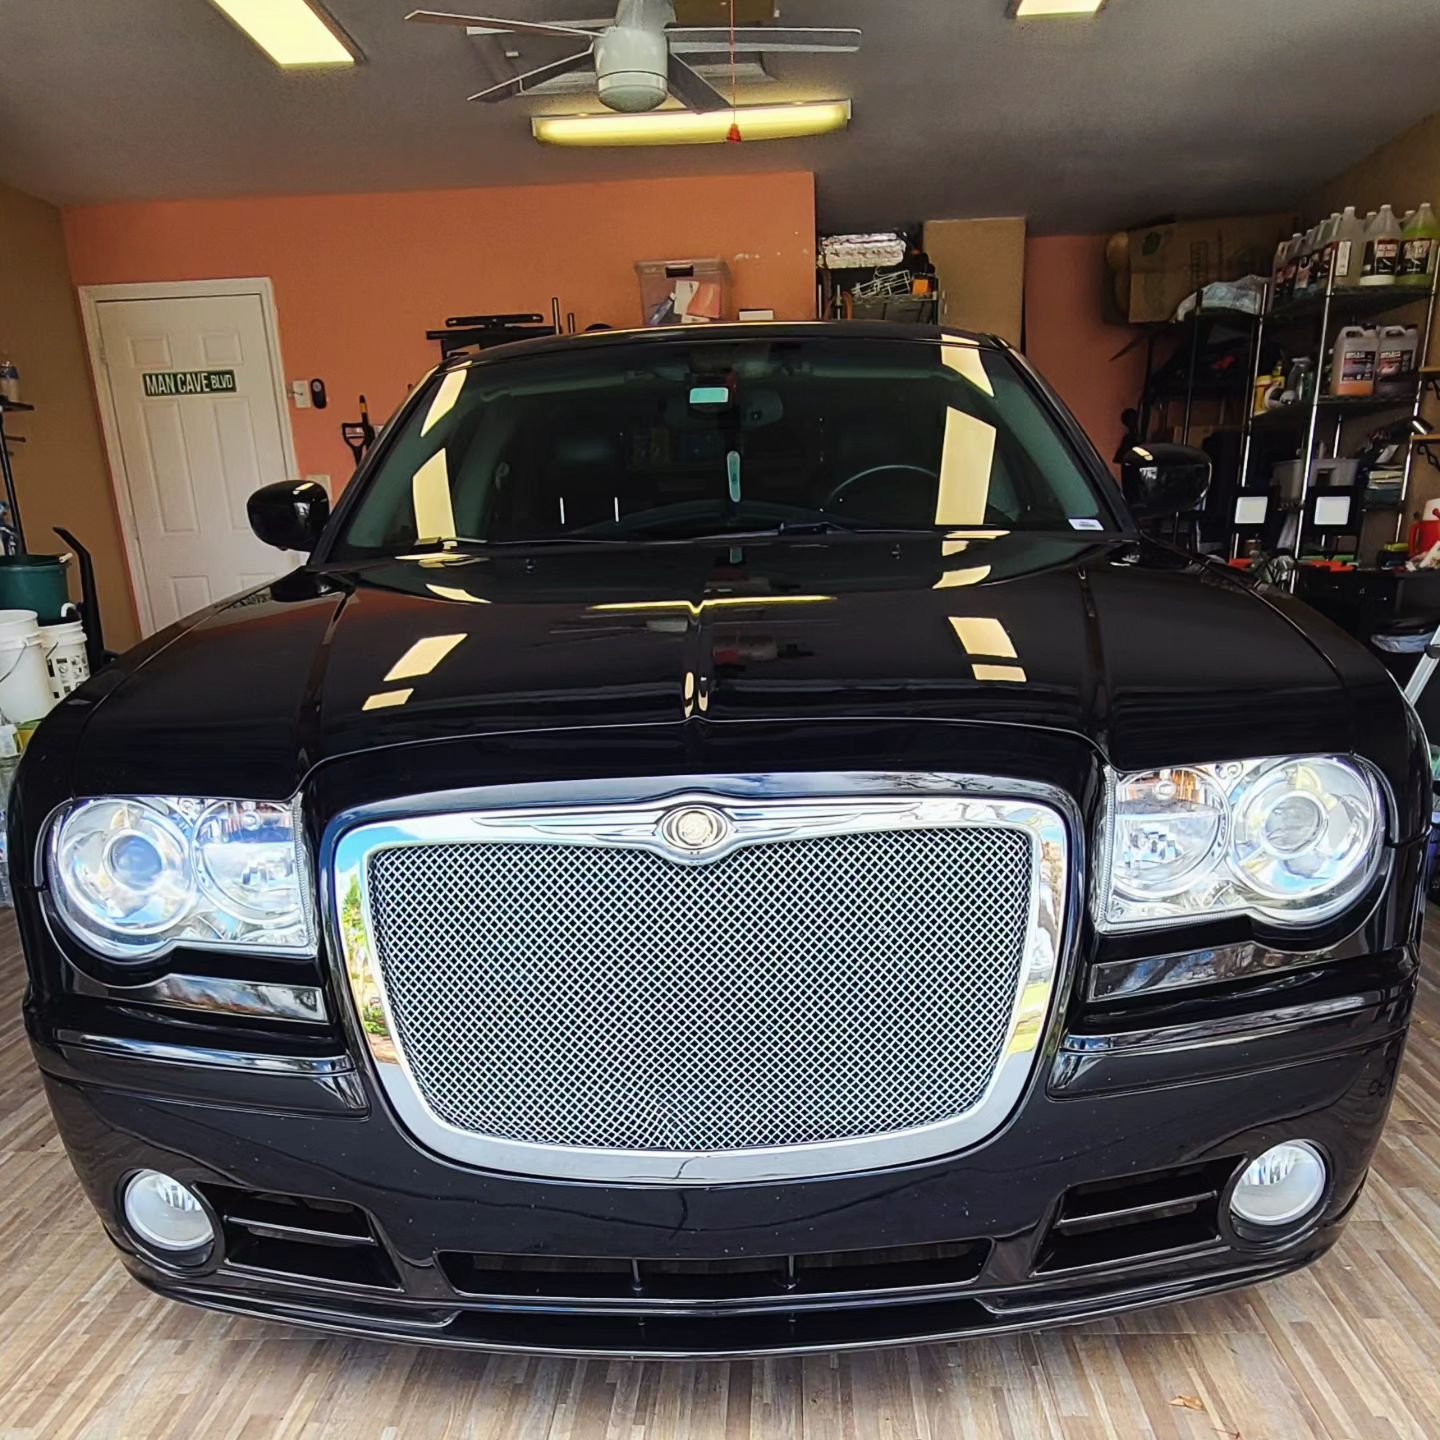 This Chrysler 300 C SRT8 emerges from our Platinum Detail Package like a new vehicle. Every inch of this powerhouse has been cared for, from the exterior to the interior. Elevate your driving experience with our attention to detail and commitment to 